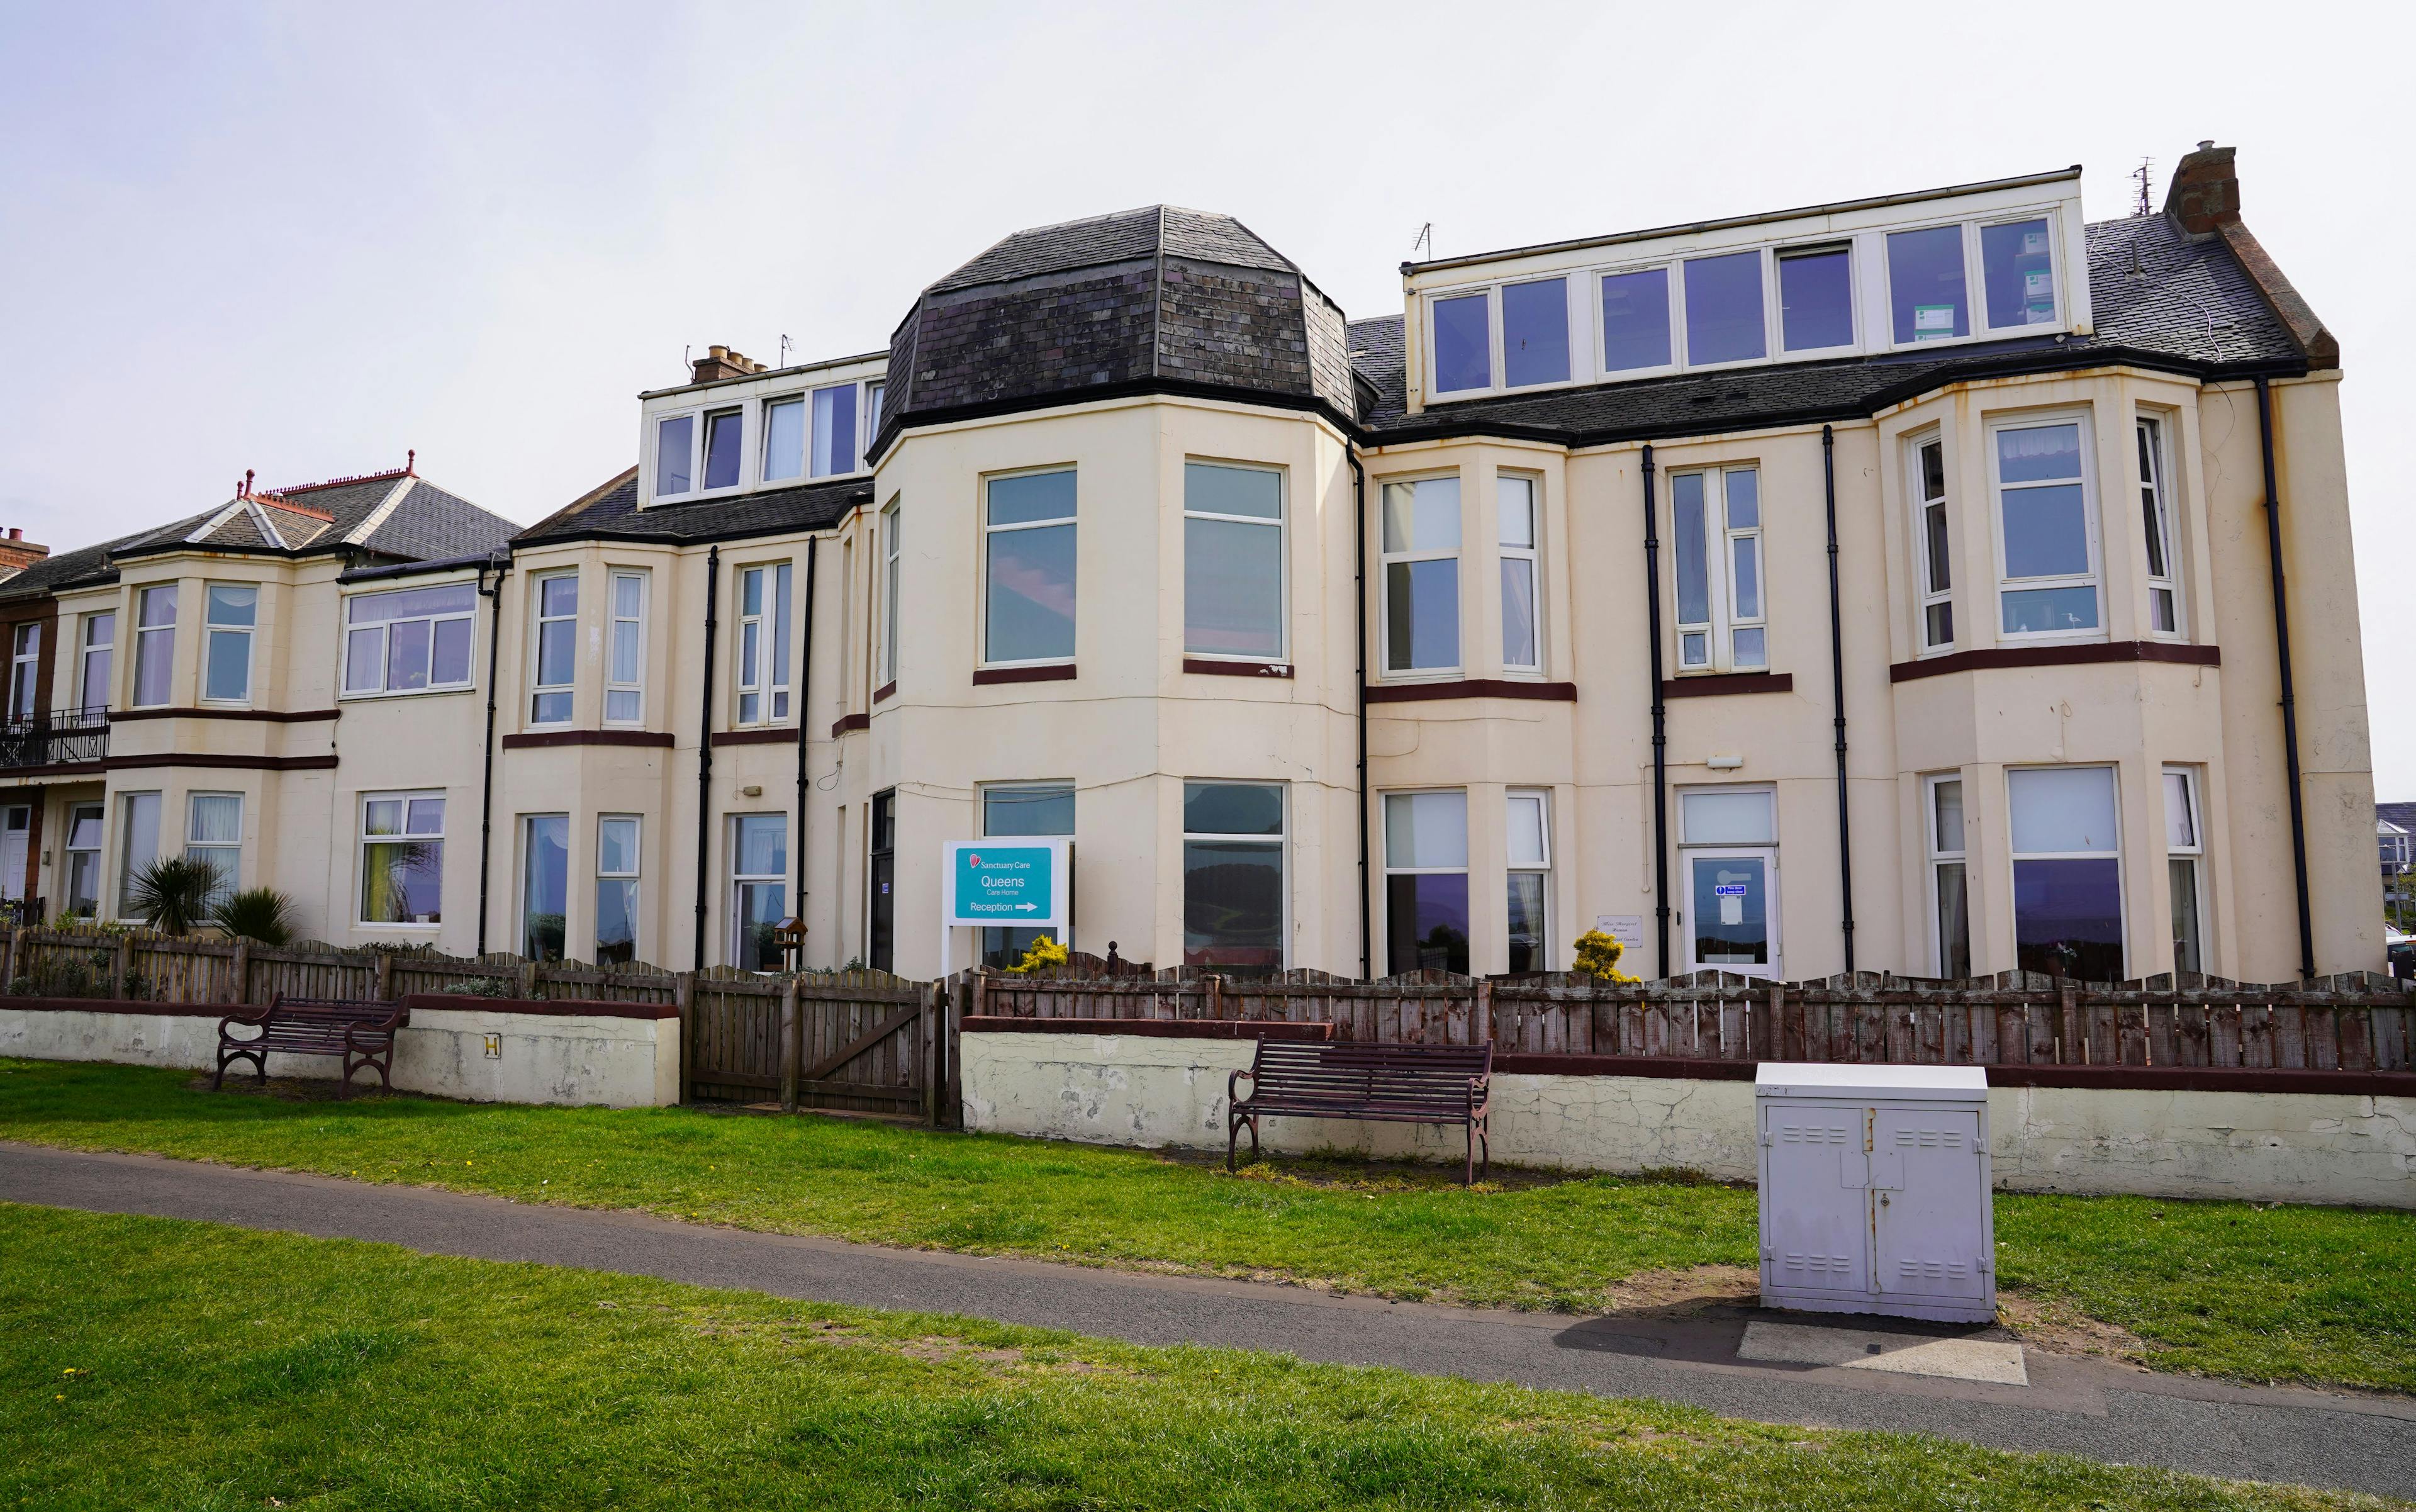 Exterior of Queens Care Home in Prestwick, Ayrshire